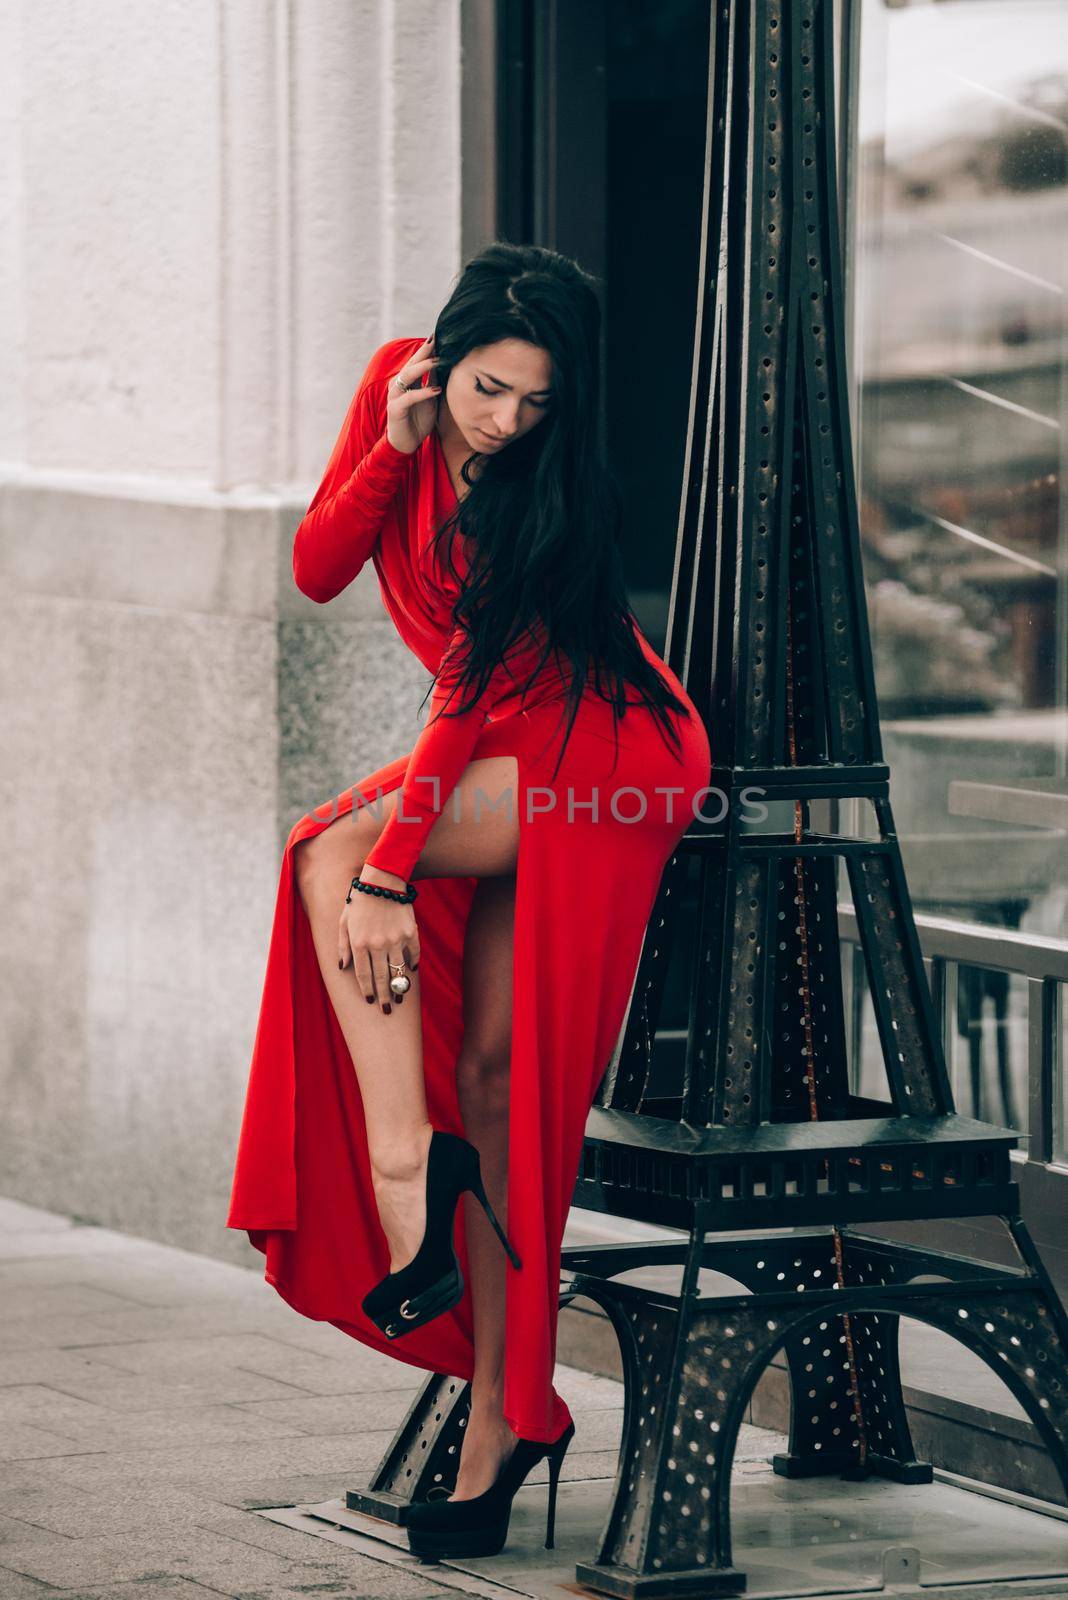 Charming young woman in red sexy dress posing . photo of a seductive woman with black hair near decorative tower. Selective focus, filmgrain by Ashtray25